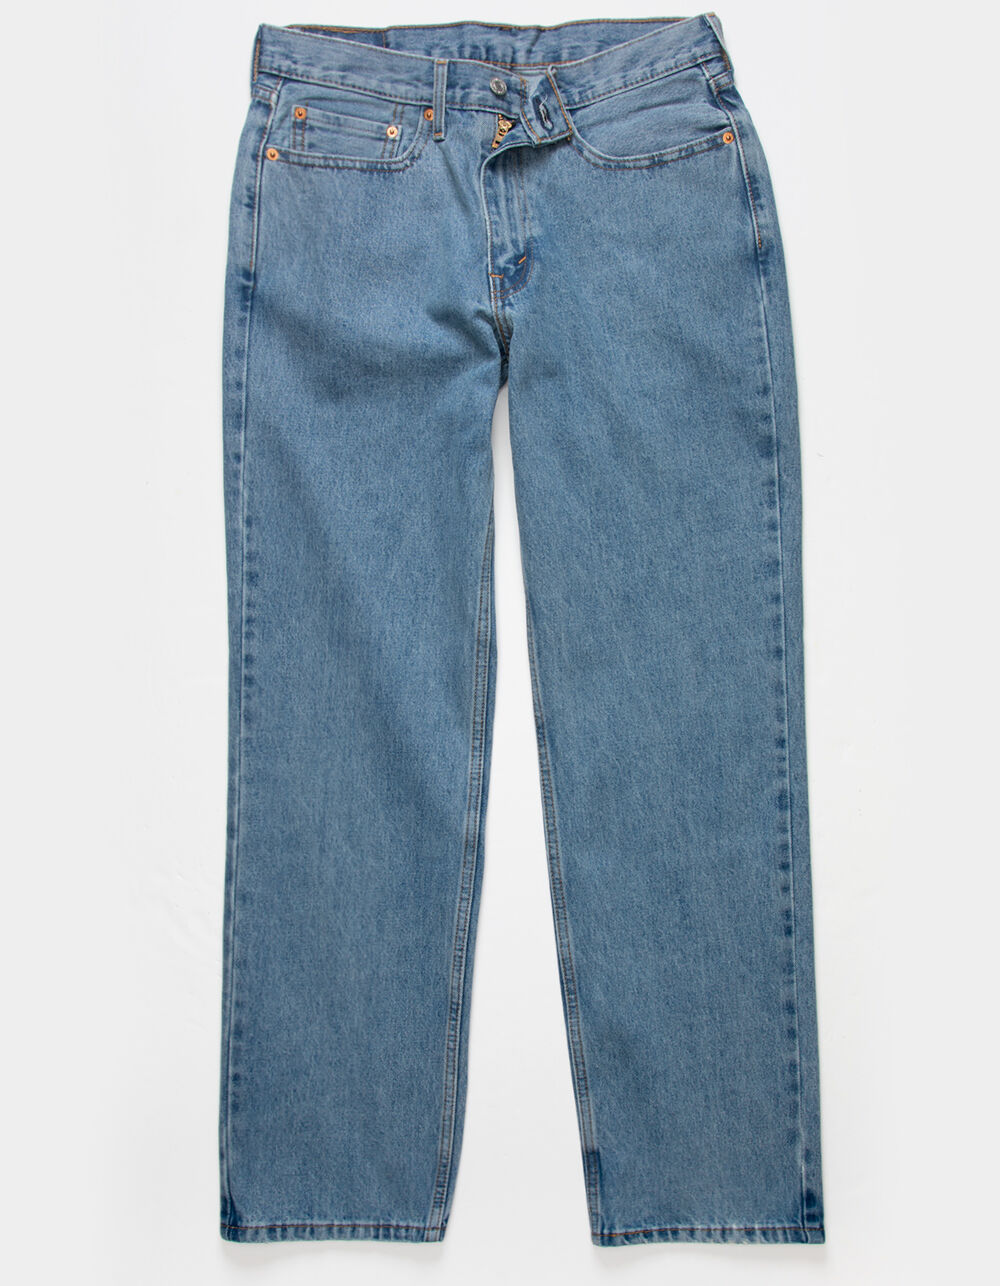 LEVI'S 550 Relaxed Mens Jeans - MEDIUM WASH | Tillys